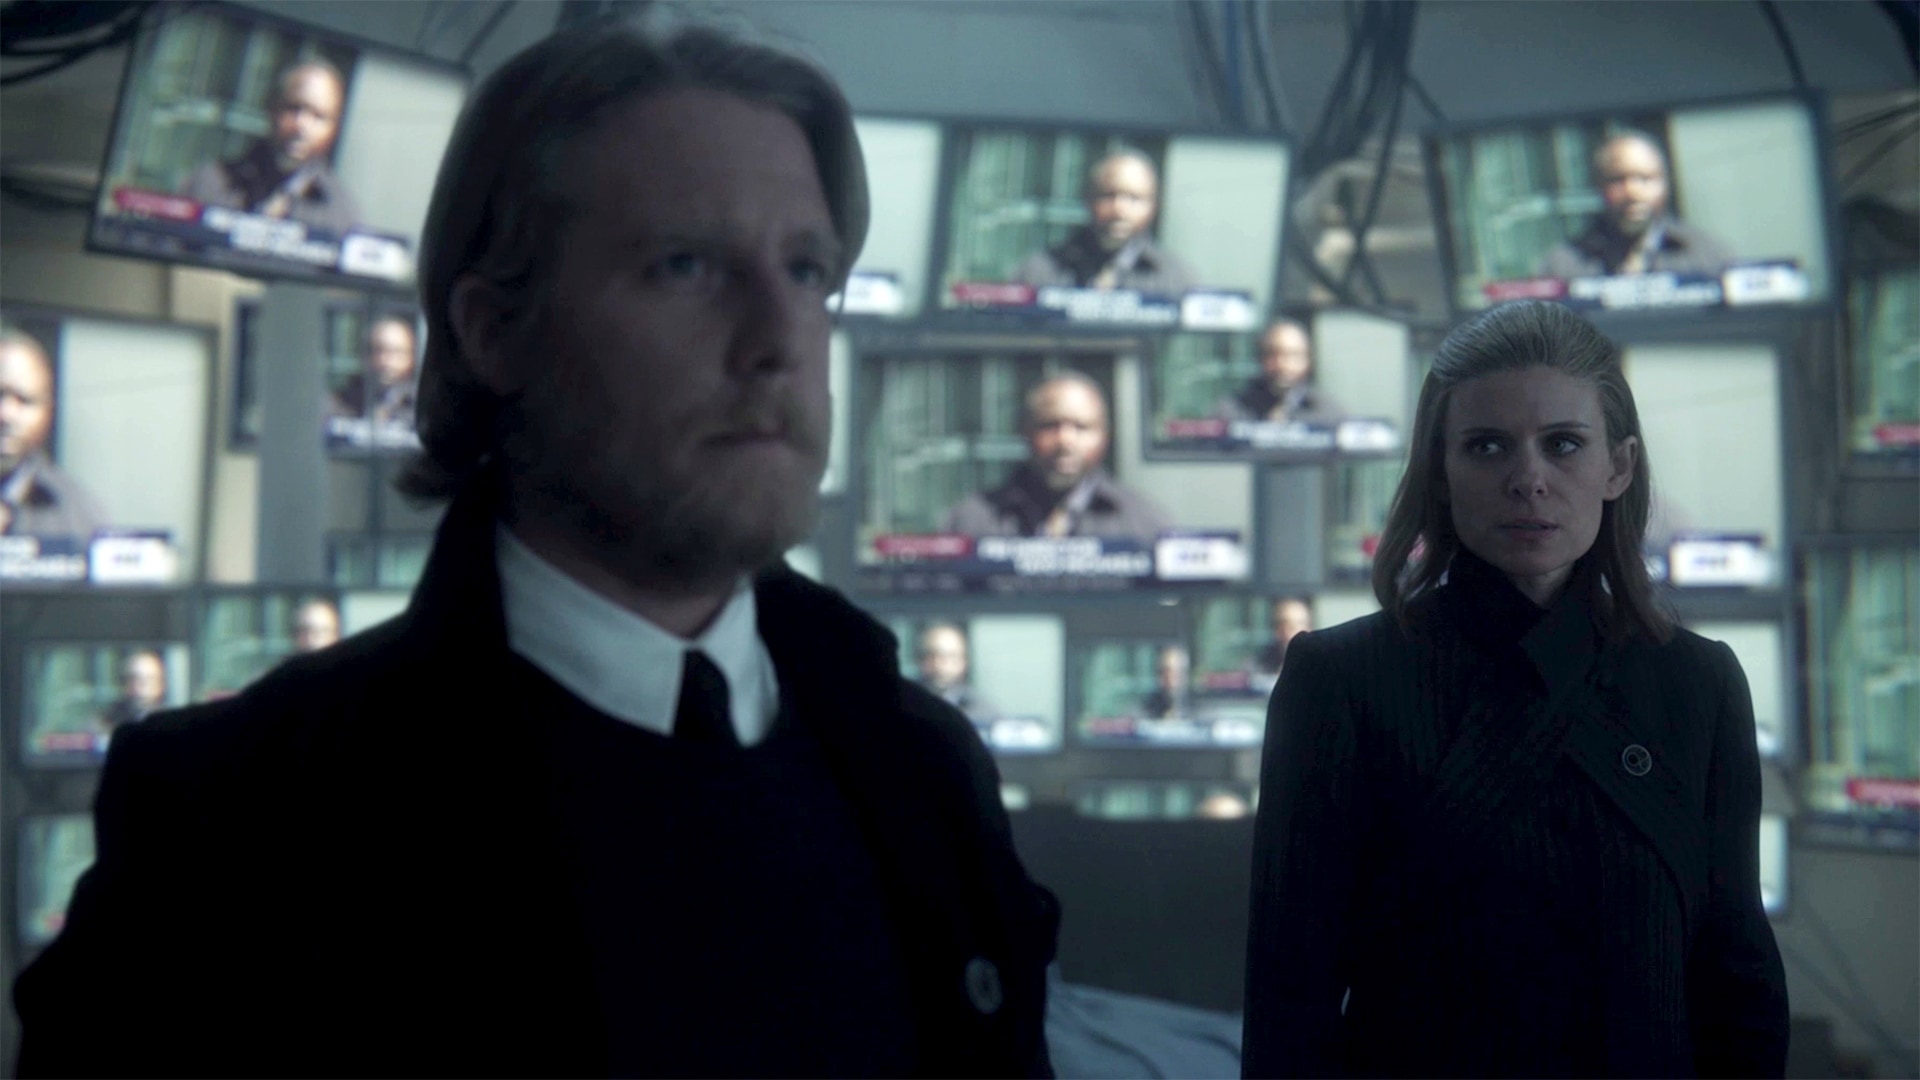 Ashley and Murphy standing in a room with several TV screens